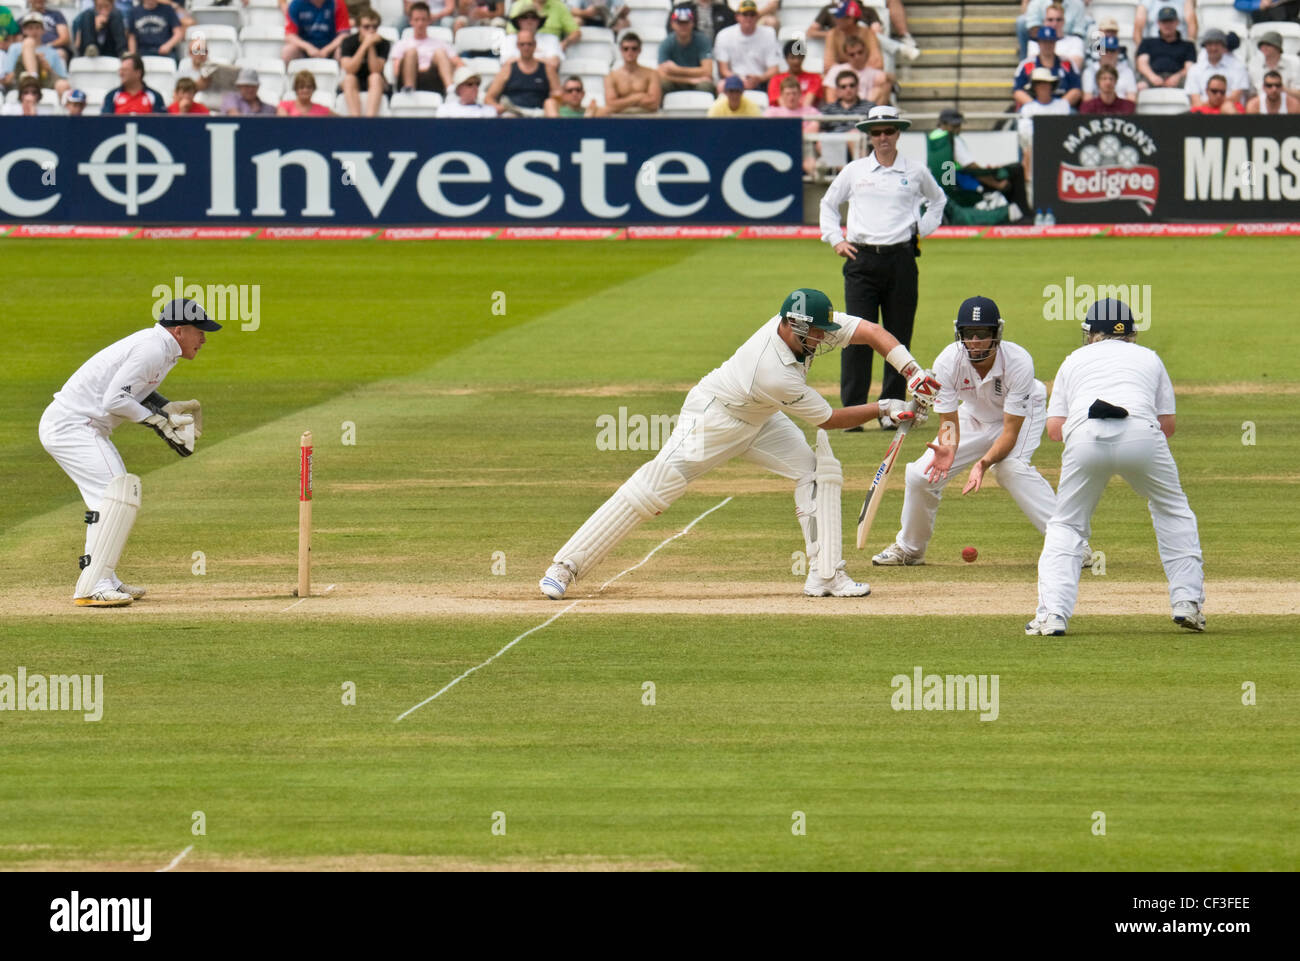 Test match cricket in play at Lords cricket ground in London. Stock Photo